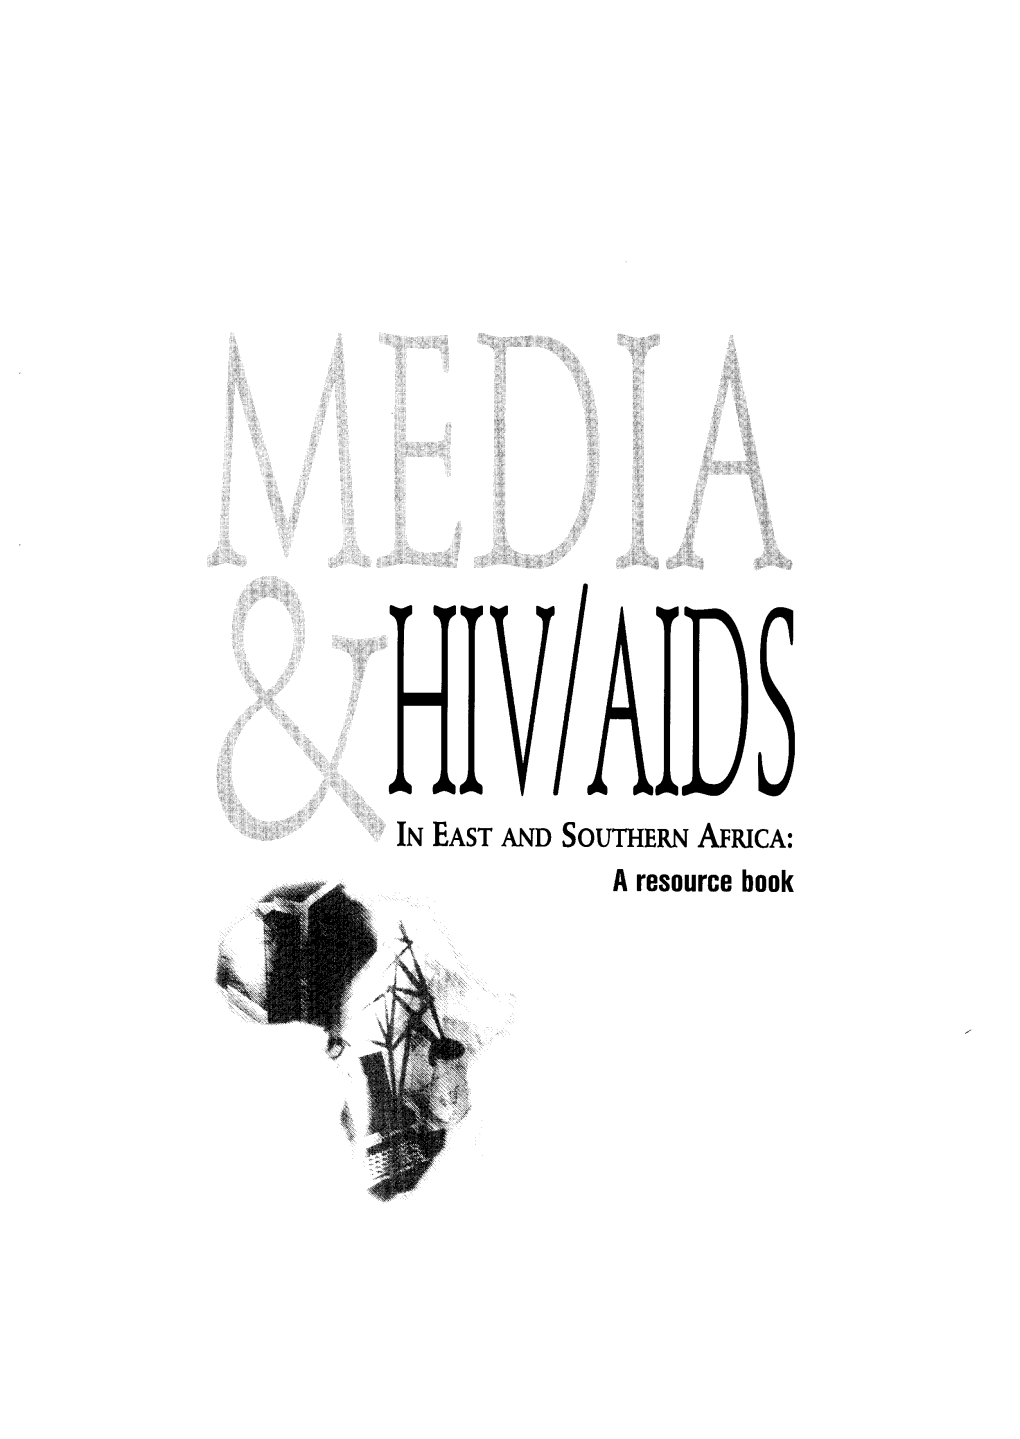 Media and HIV/AIDS in East and Southern Africa: a Resource Book